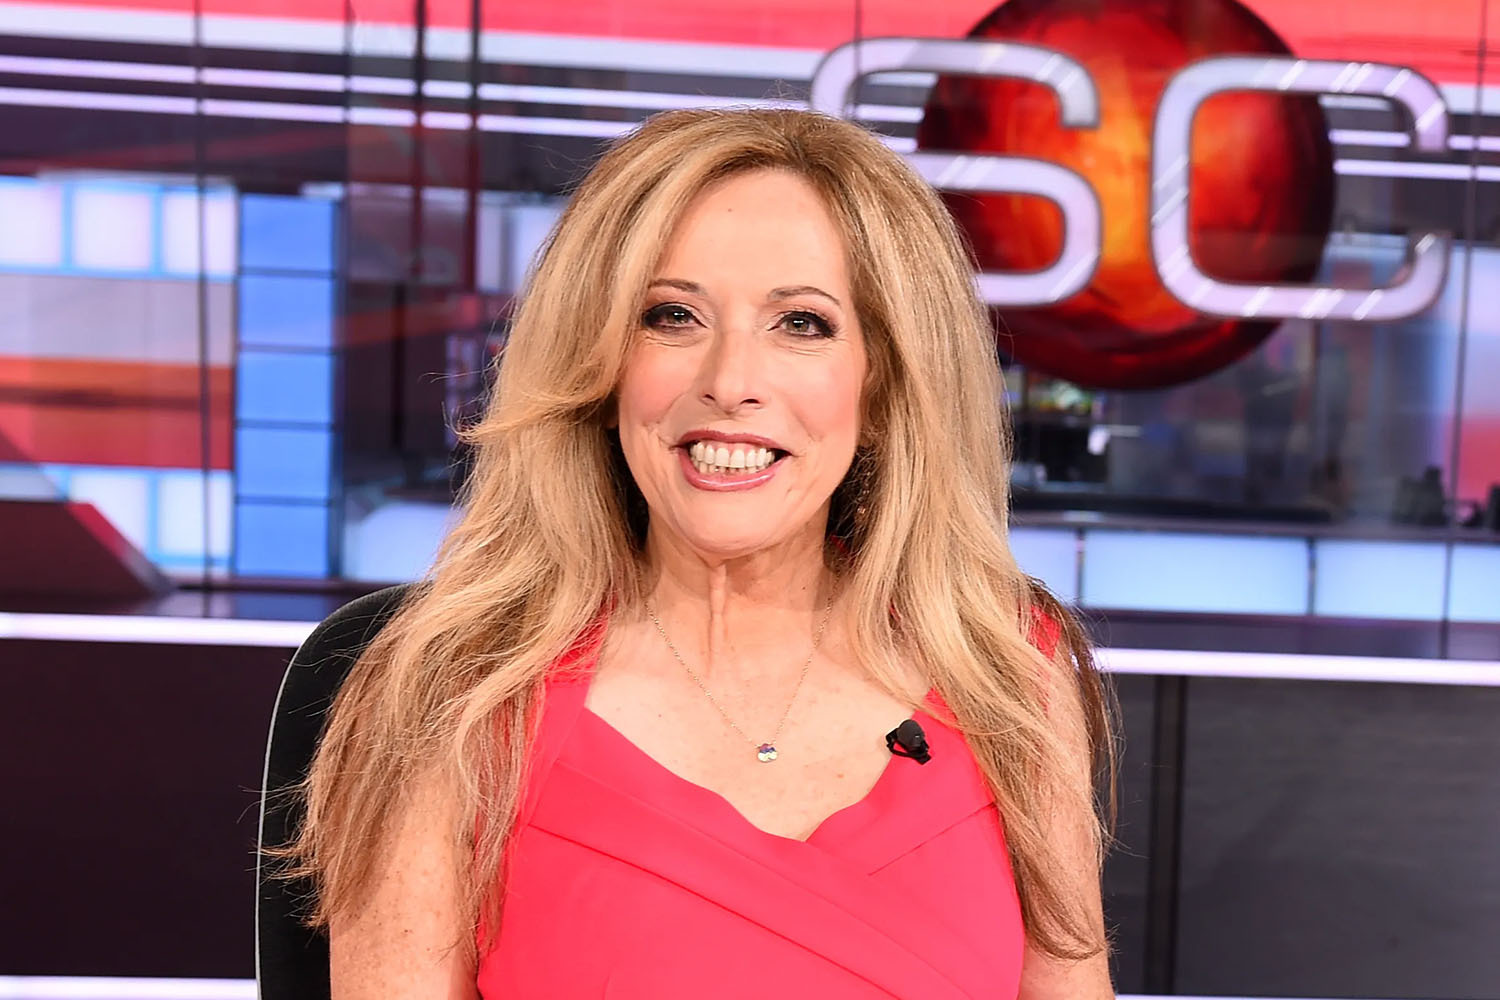 bill ridings recommends linda cohn is hot pic